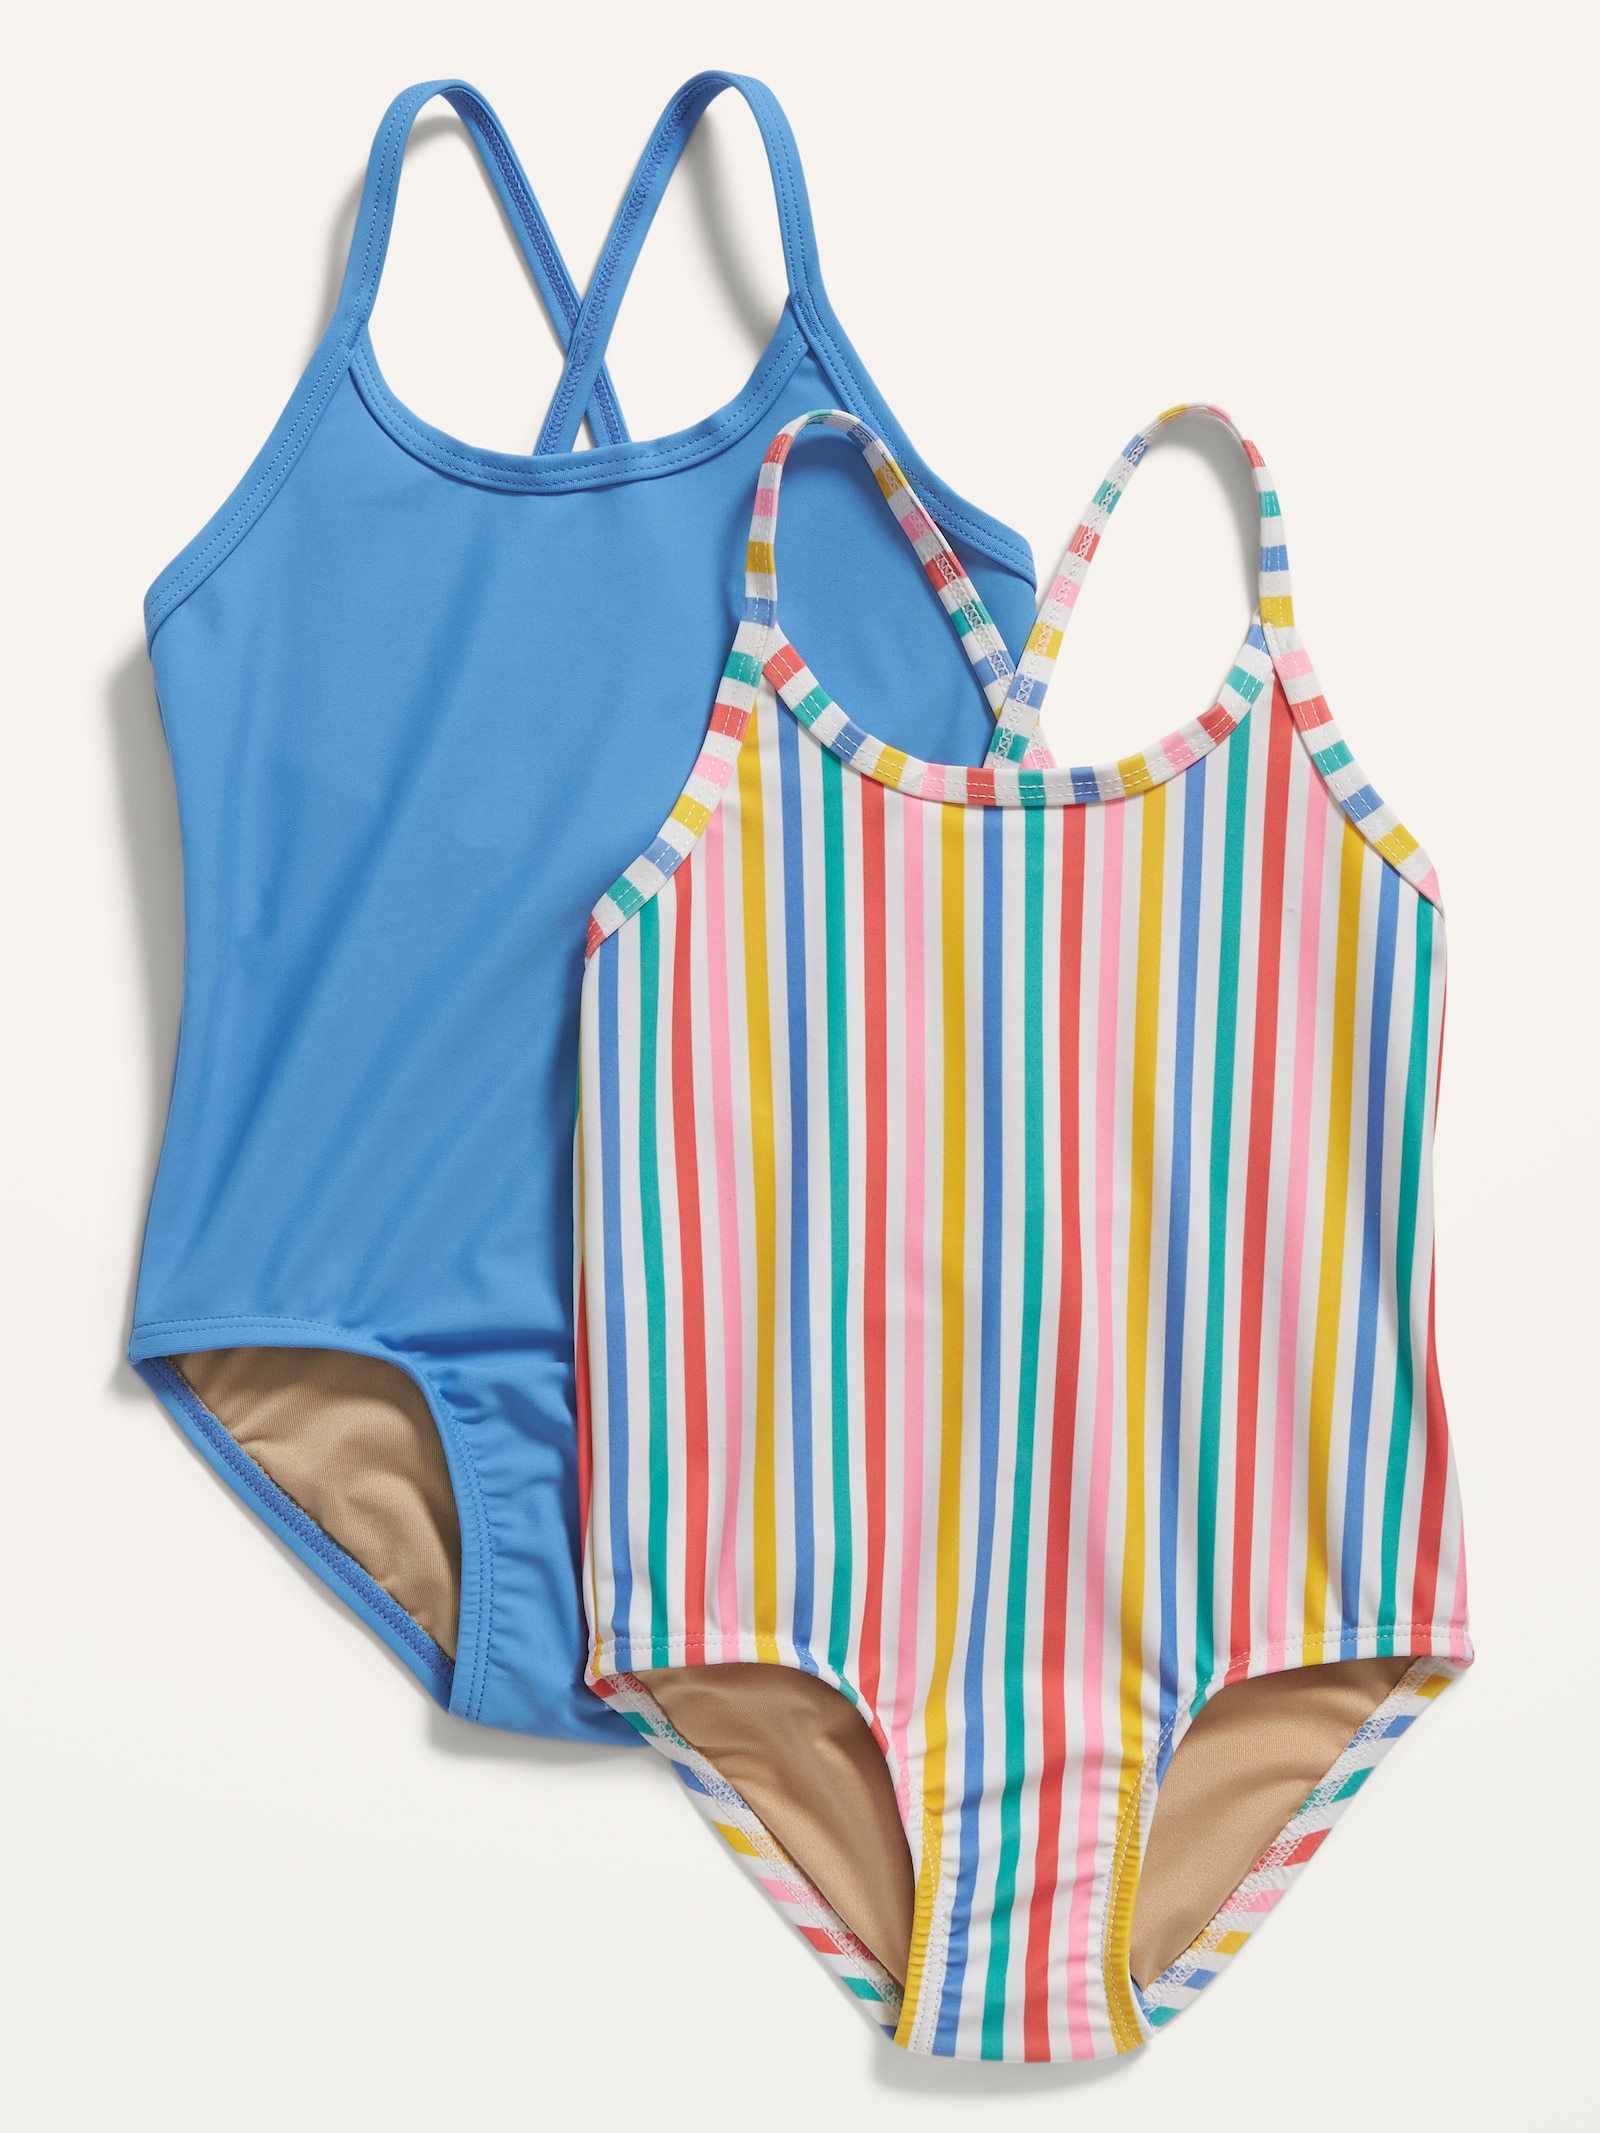 NWT Old Navy Seersucker Striped Ruffled Swimsuit 1PC 3T Toddler Girl